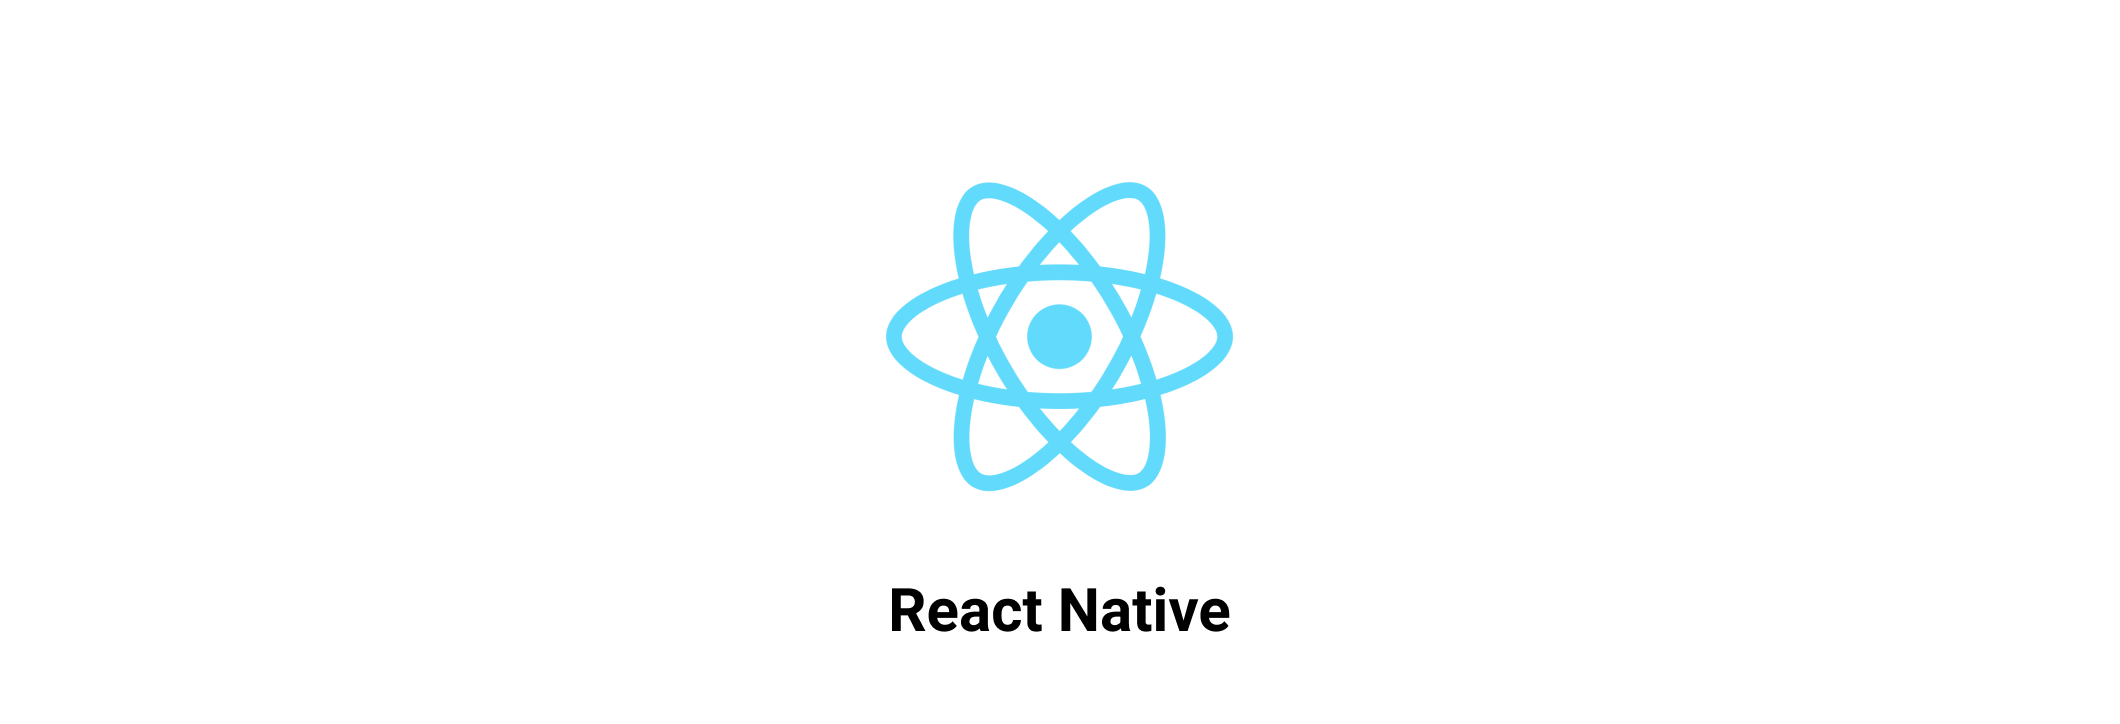 Best Android Development Tools React Native